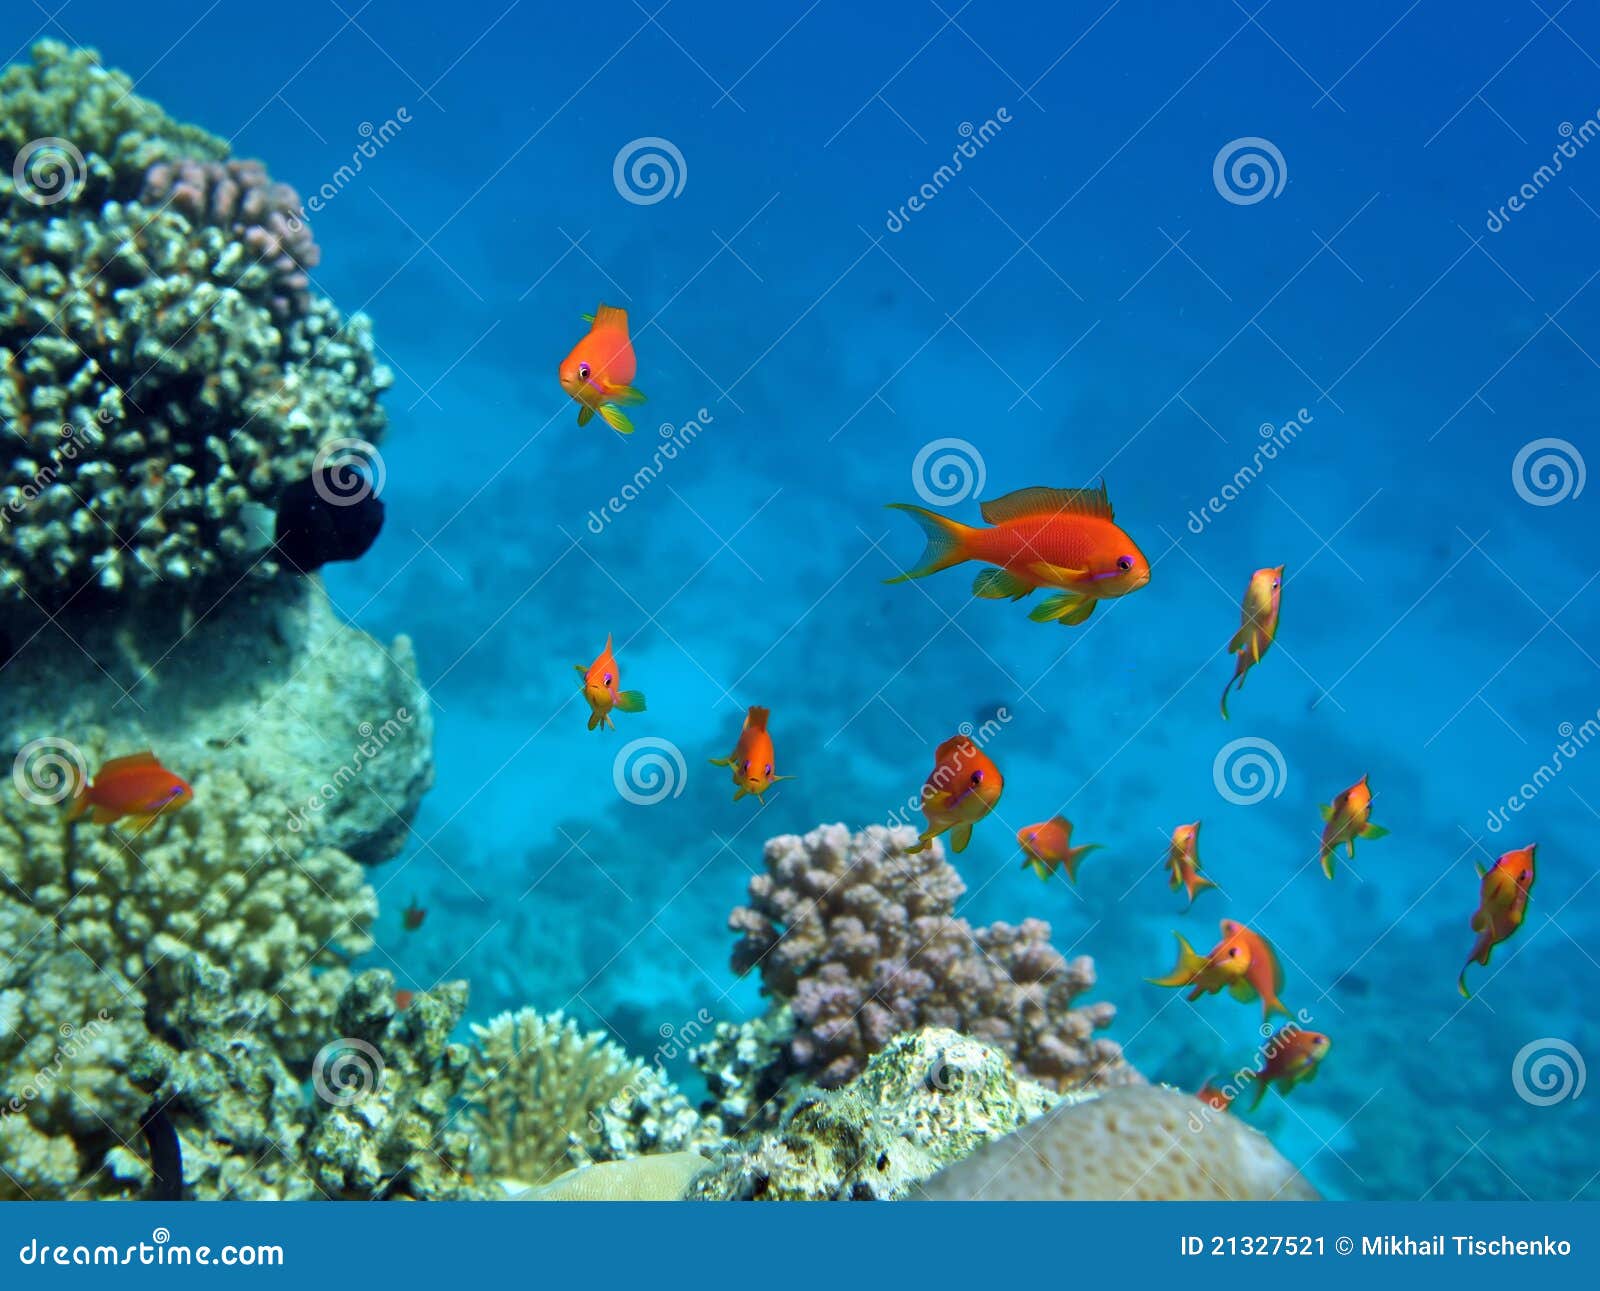 Red coral perch stock image. Image of exquisite, leisure - 21327521